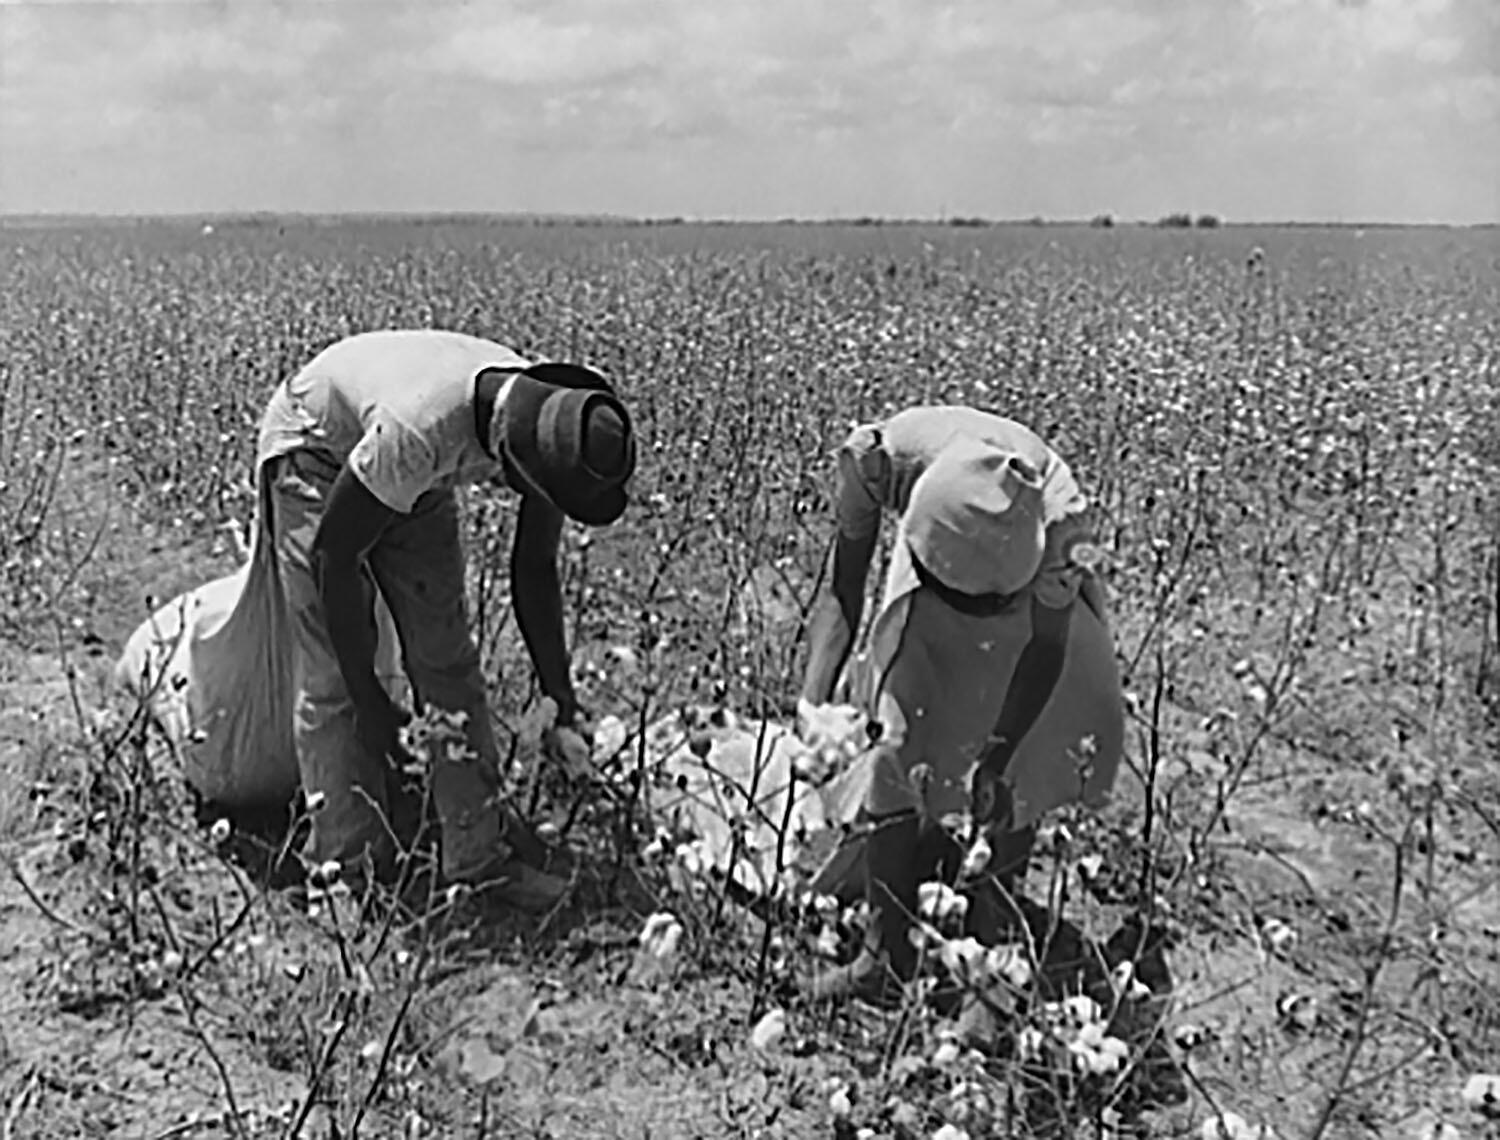 Mexican farm workers picking cotton in a field near the U.S.–Mexico border, 1942. (Photo by Howard R. Hollem, courtesy of the Library of Congress.)